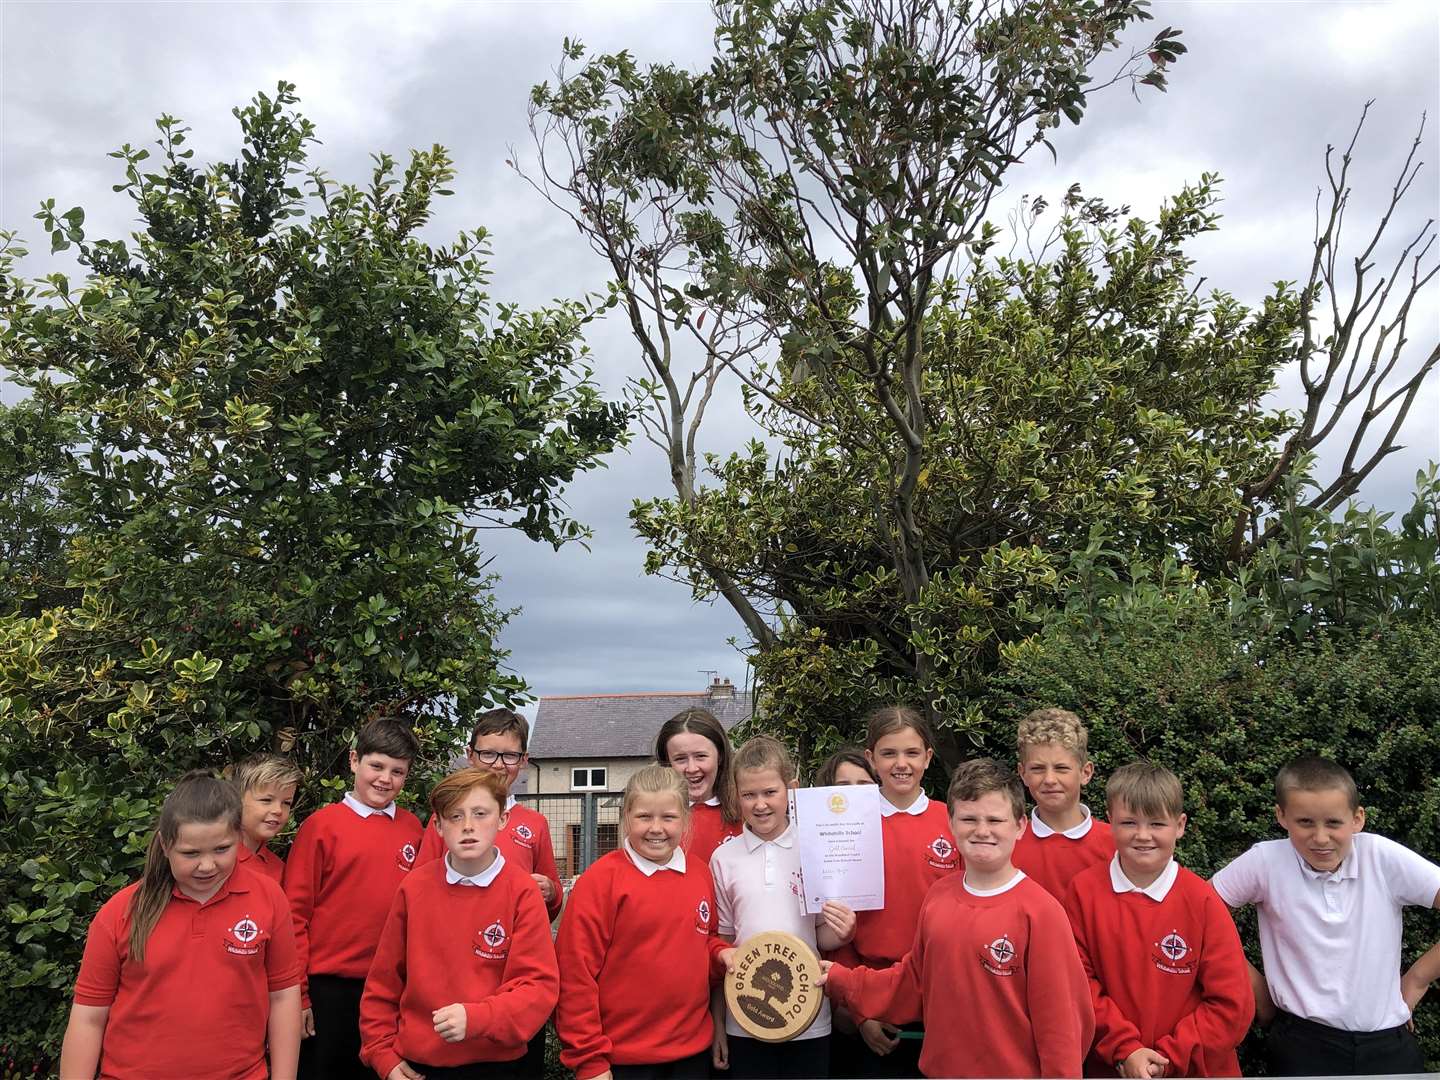 Whitehills Primary school pupils with their gold award from the Woodland Trust.